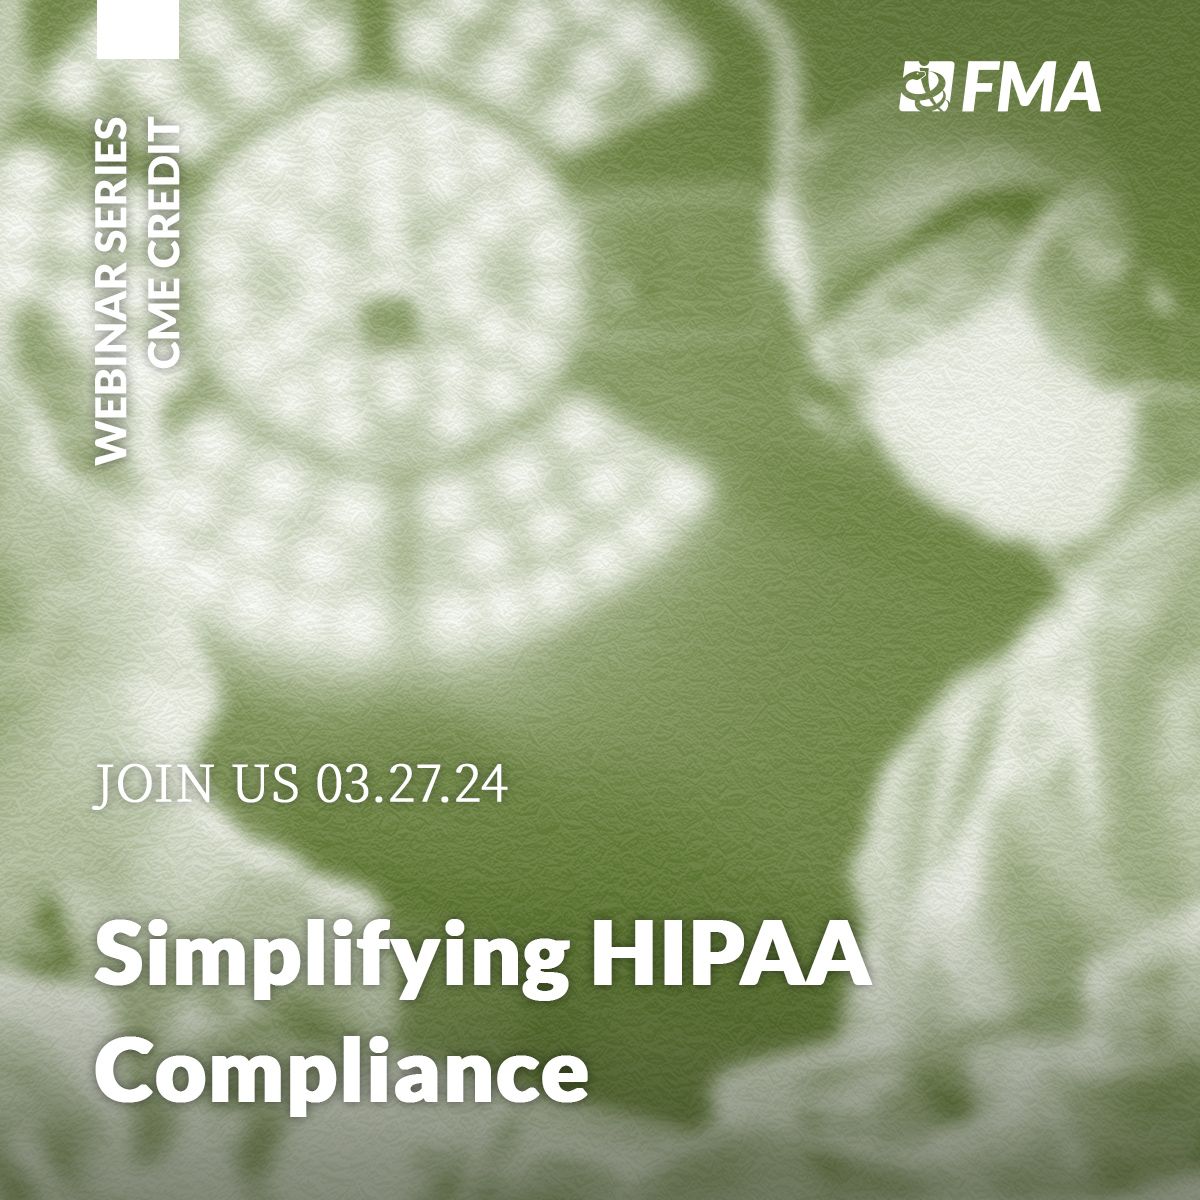 JOIN US WEDNESDAY - Taking compliance and your patient's privacy seriously is more important than ever. Join us for a CME webinar on March 27 on the current state of HIPAA compliance, audits, & strategies to avoid privacy breaches and compliance mistakes: buff.ly/3VwHUt3